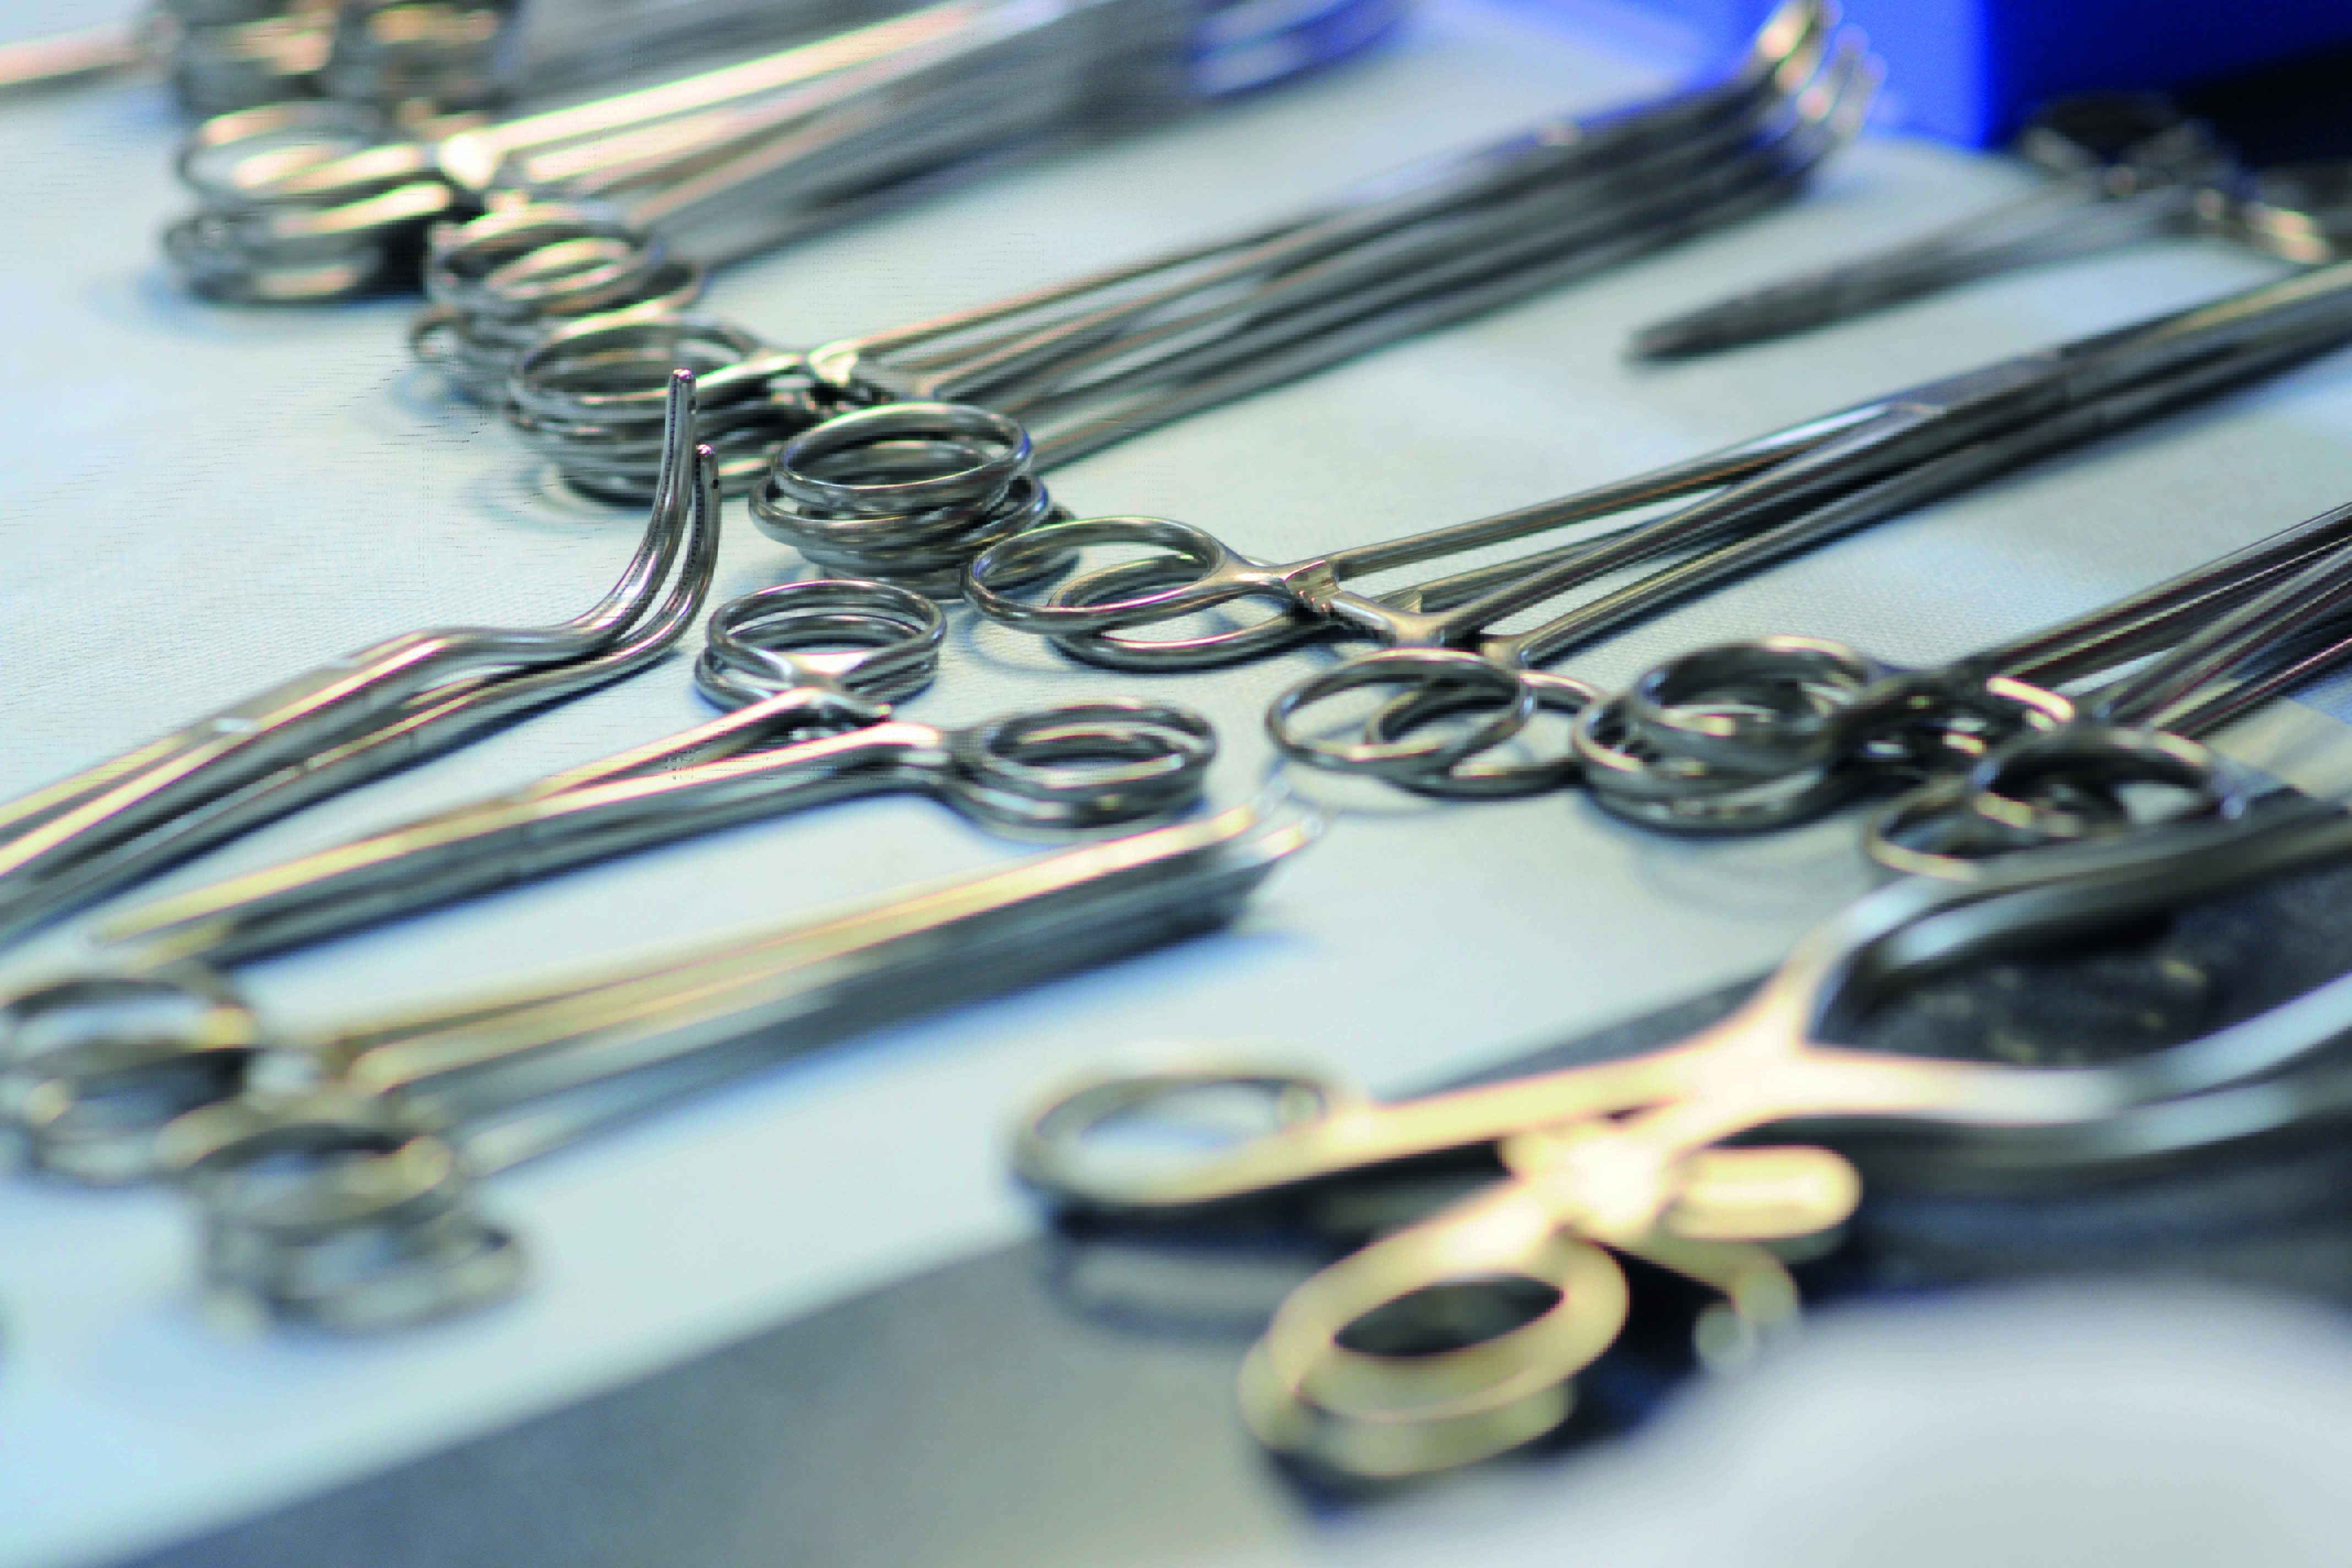 Used surgical instruments can also be quickly and precisely detected by the AI-supported assistance system.